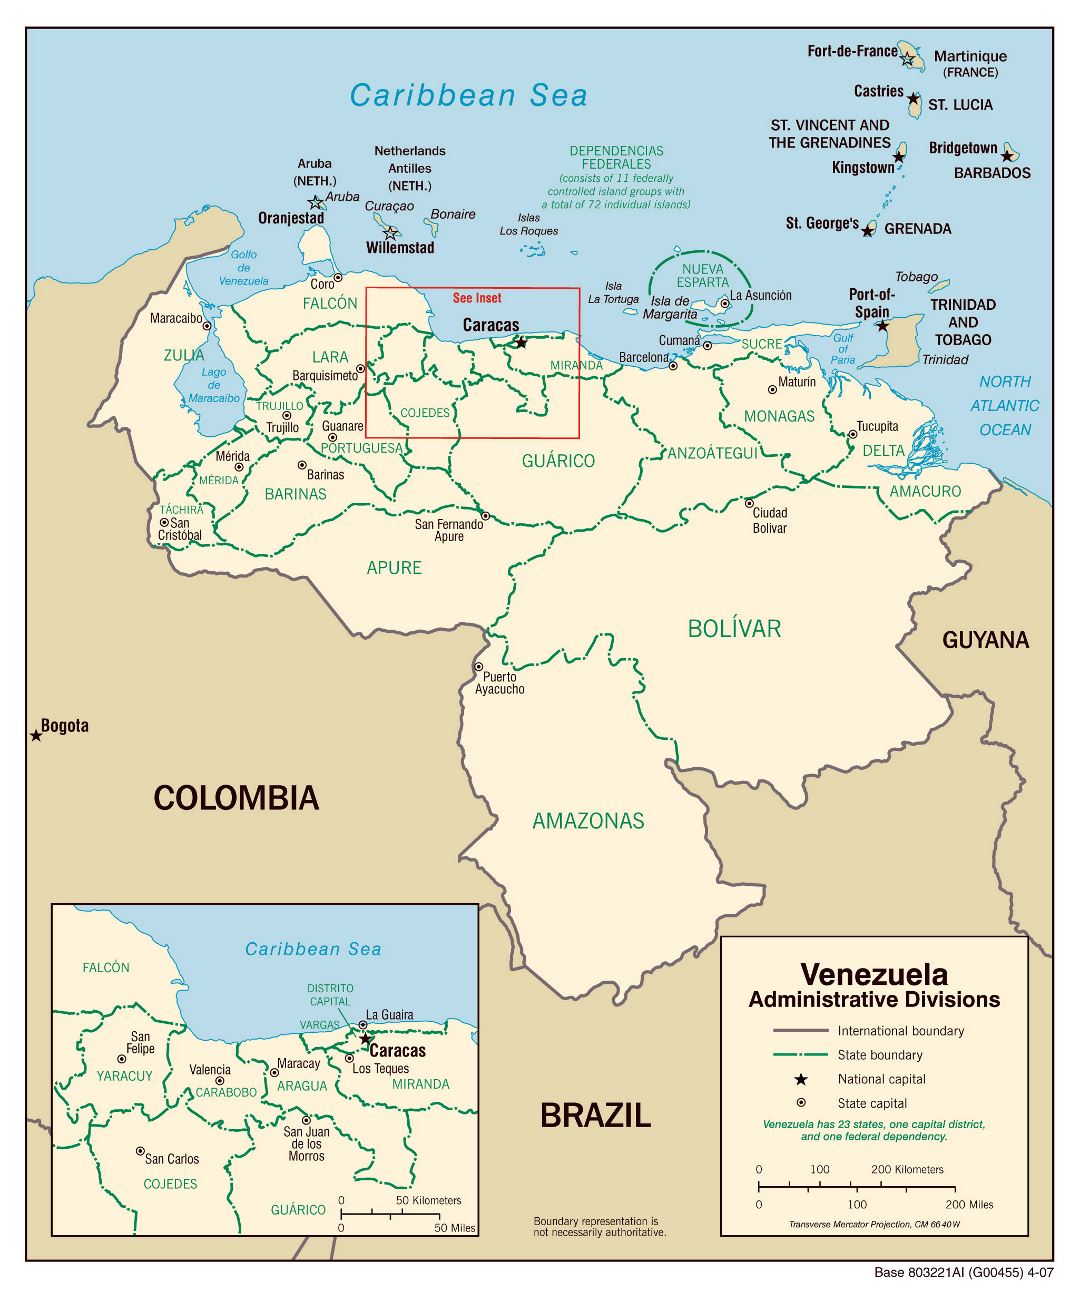 Large scale administrative divisions map of Venezuela - 2007